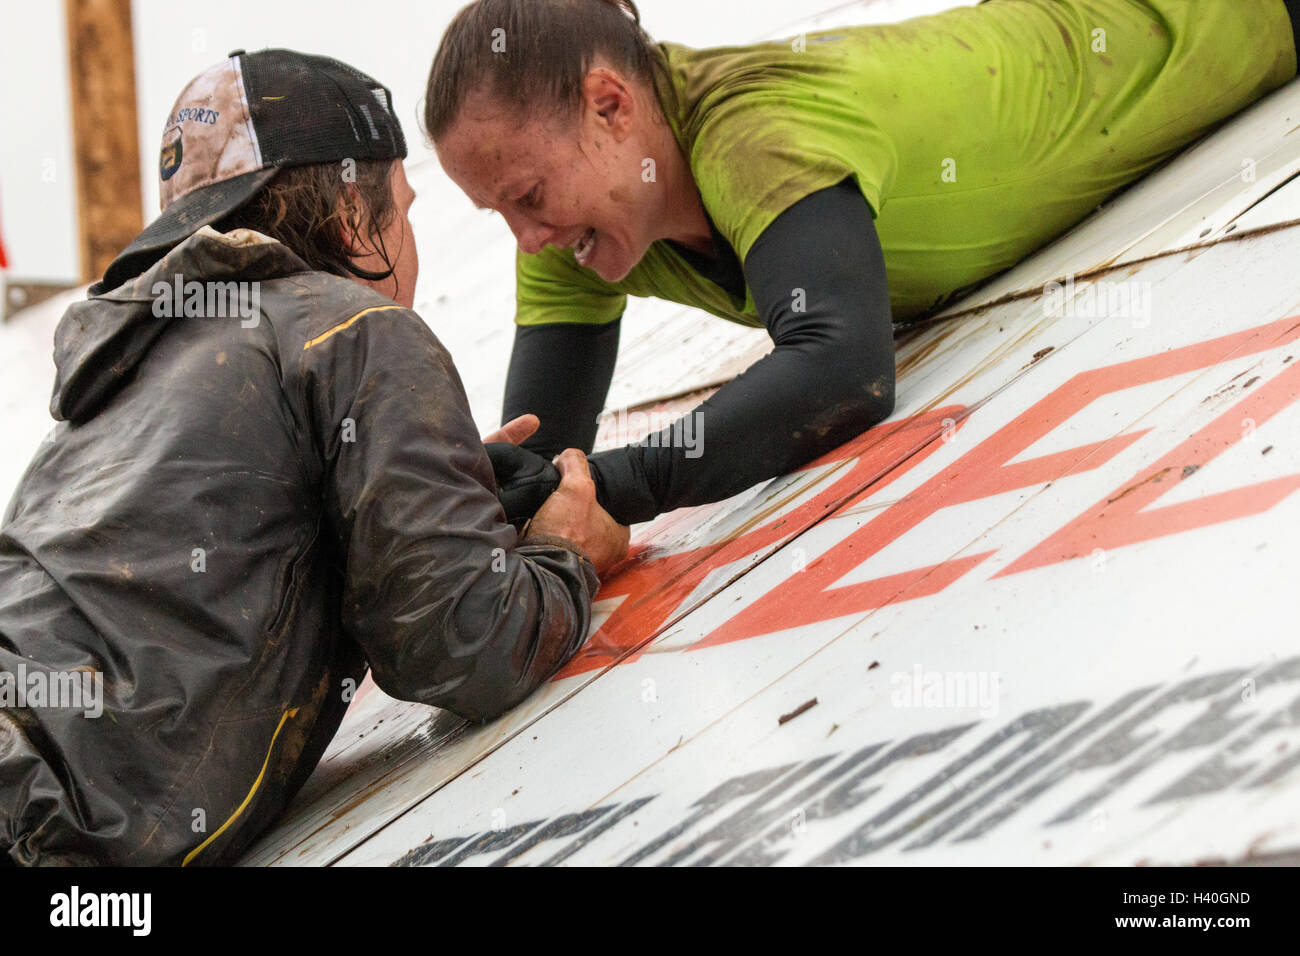 Two Tough Mudder competitors on an angle wall Pyramid Scheme Stock Photo